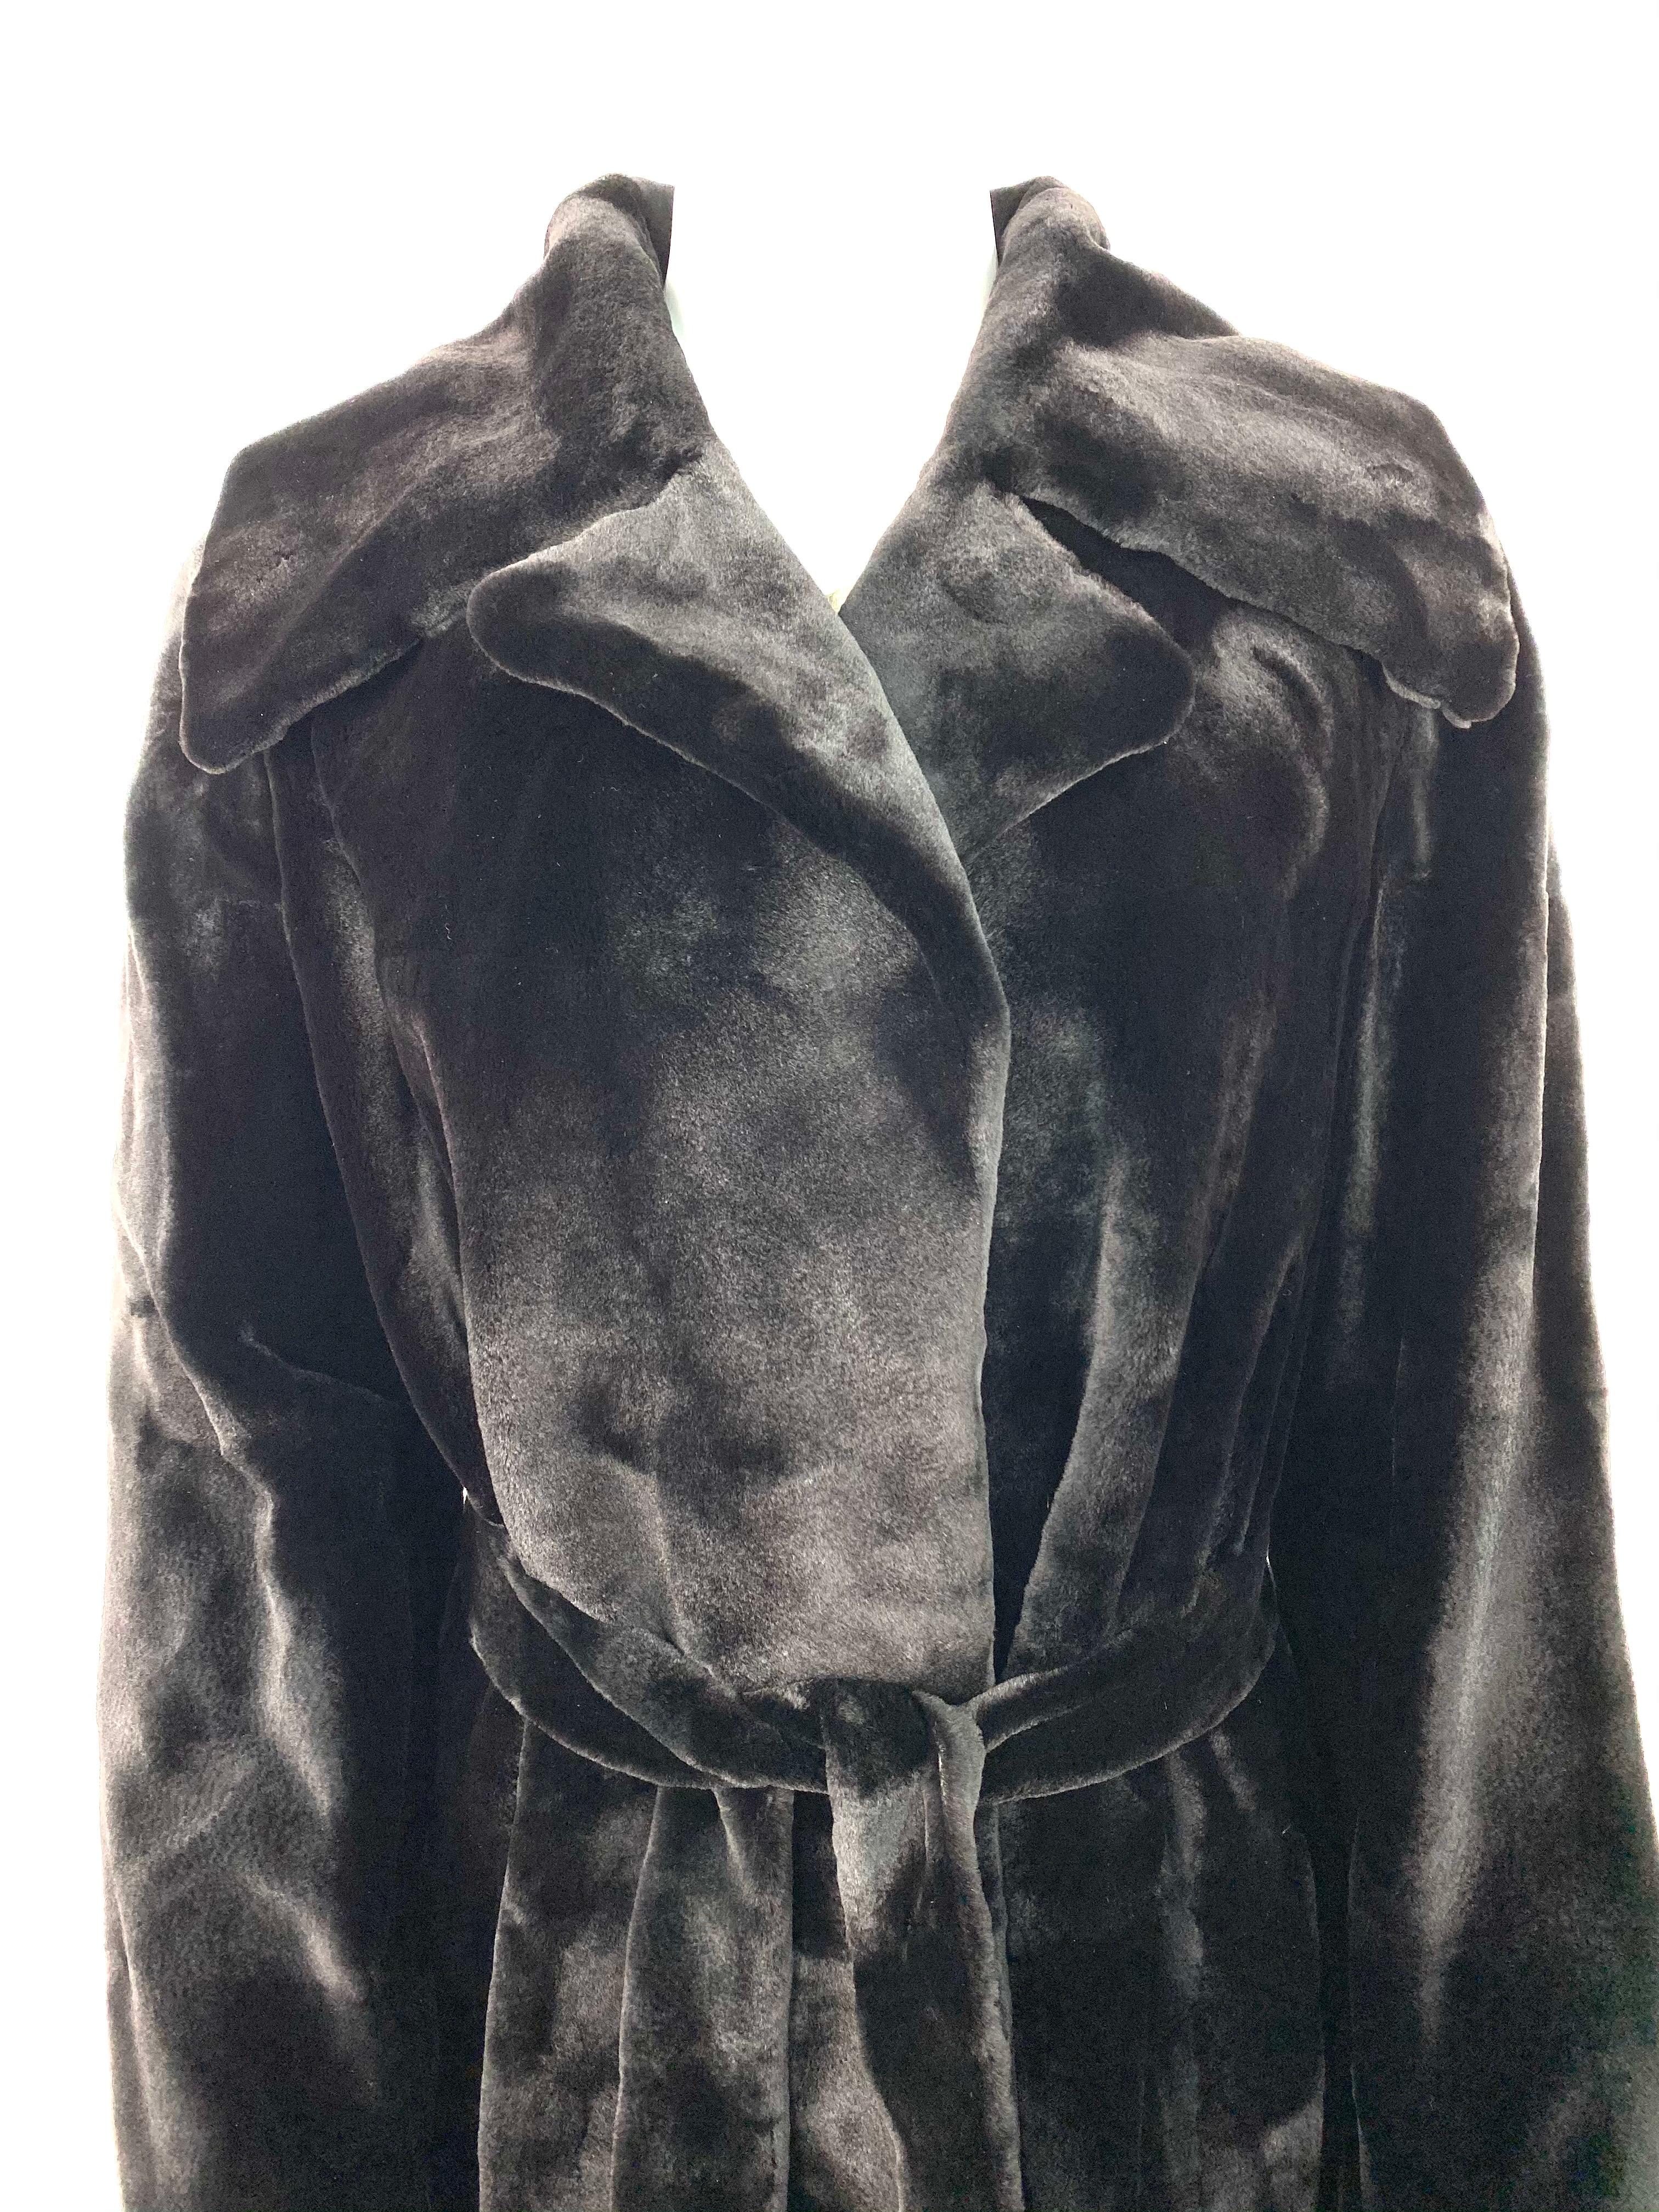 Product details:

Featuring 100% sheared mink fur and 100% double silk lining with belt closure, slit on the back (measures 18.5 inches long), collar detail and pocket on the sides, floor length. The coat fits small to large sizes. 
